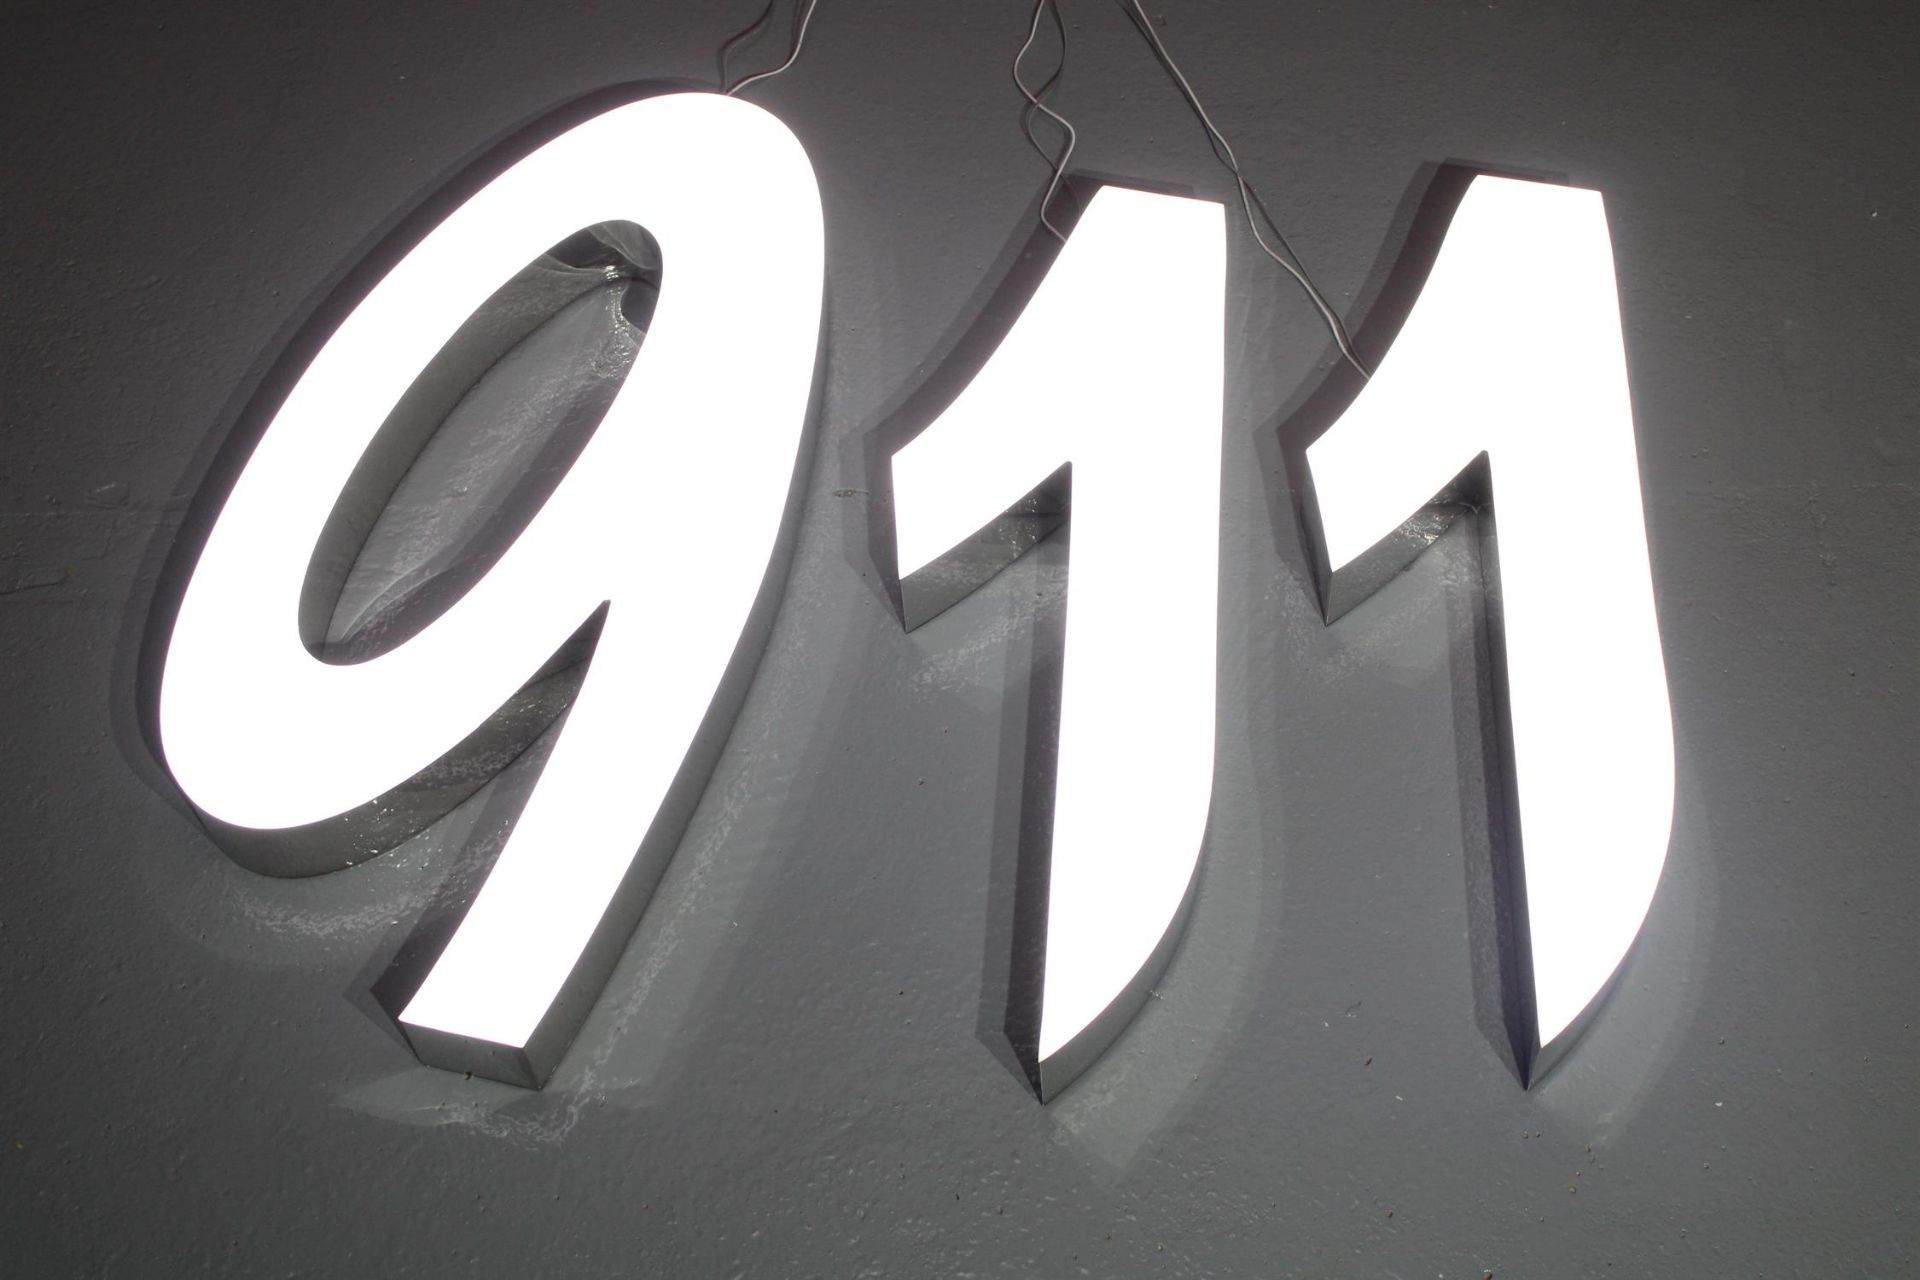 A large Illuminated Sign in the Style of the Porsche Number 911 - Image 6 of 10